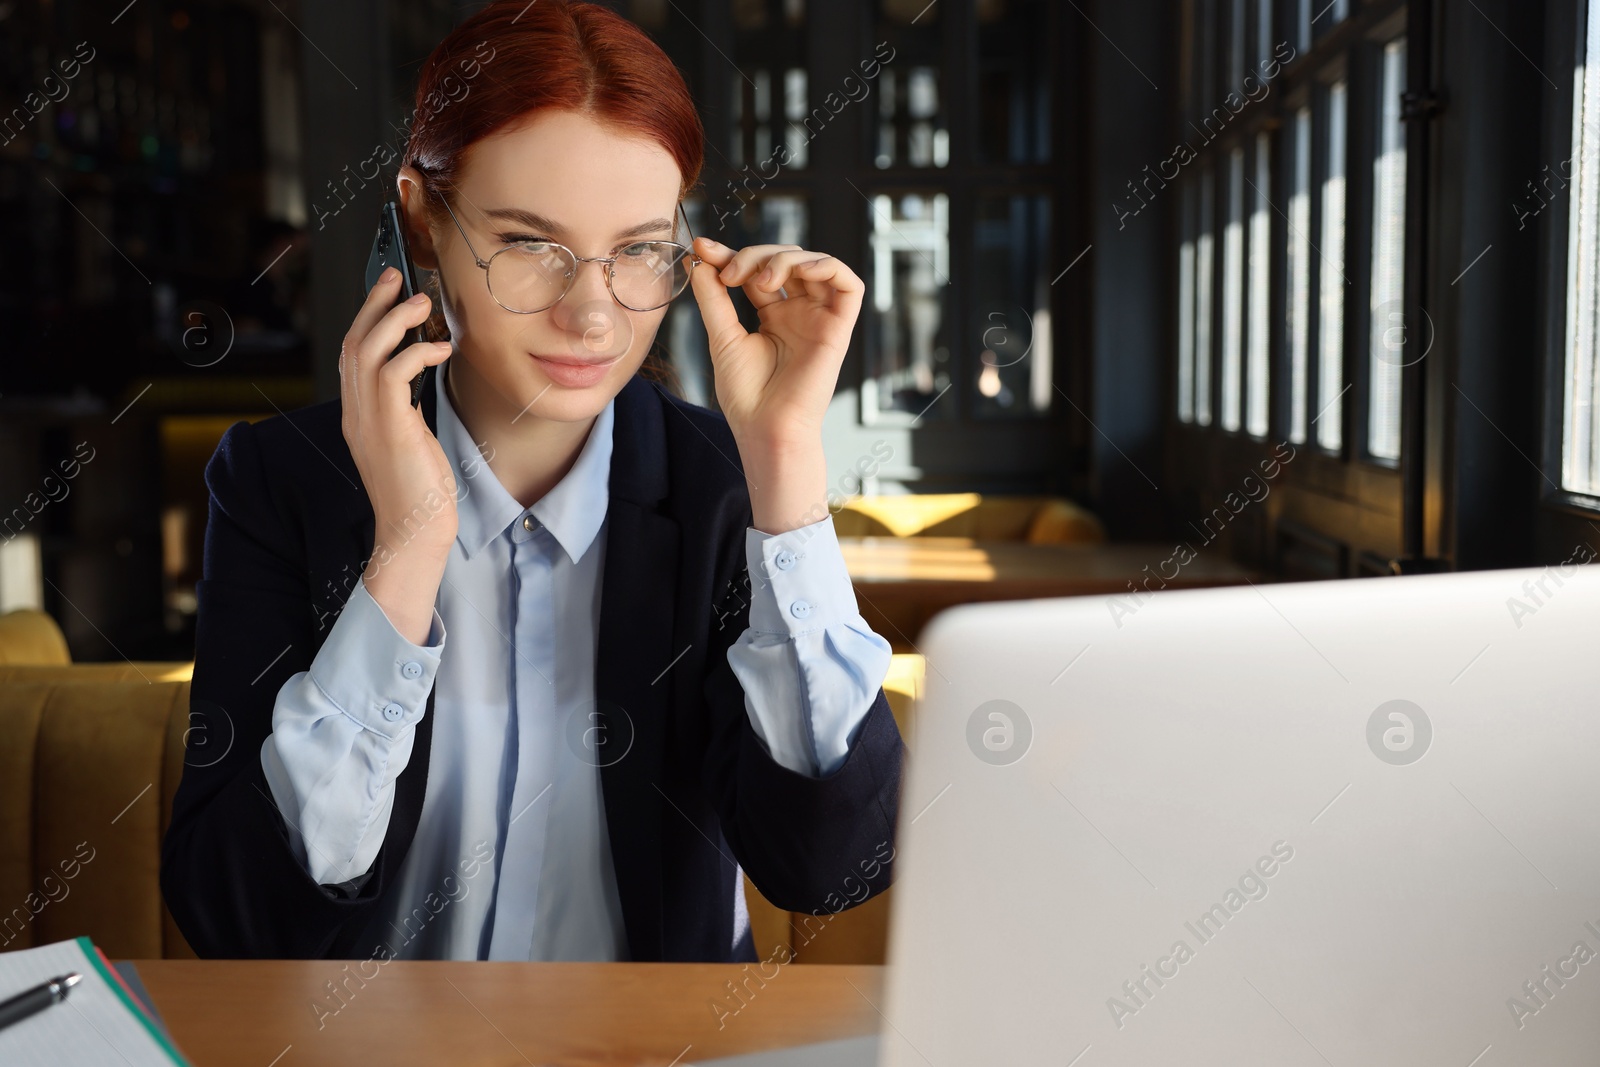 Photo of Young female student with laptop talking on phone while studying at table in cafe